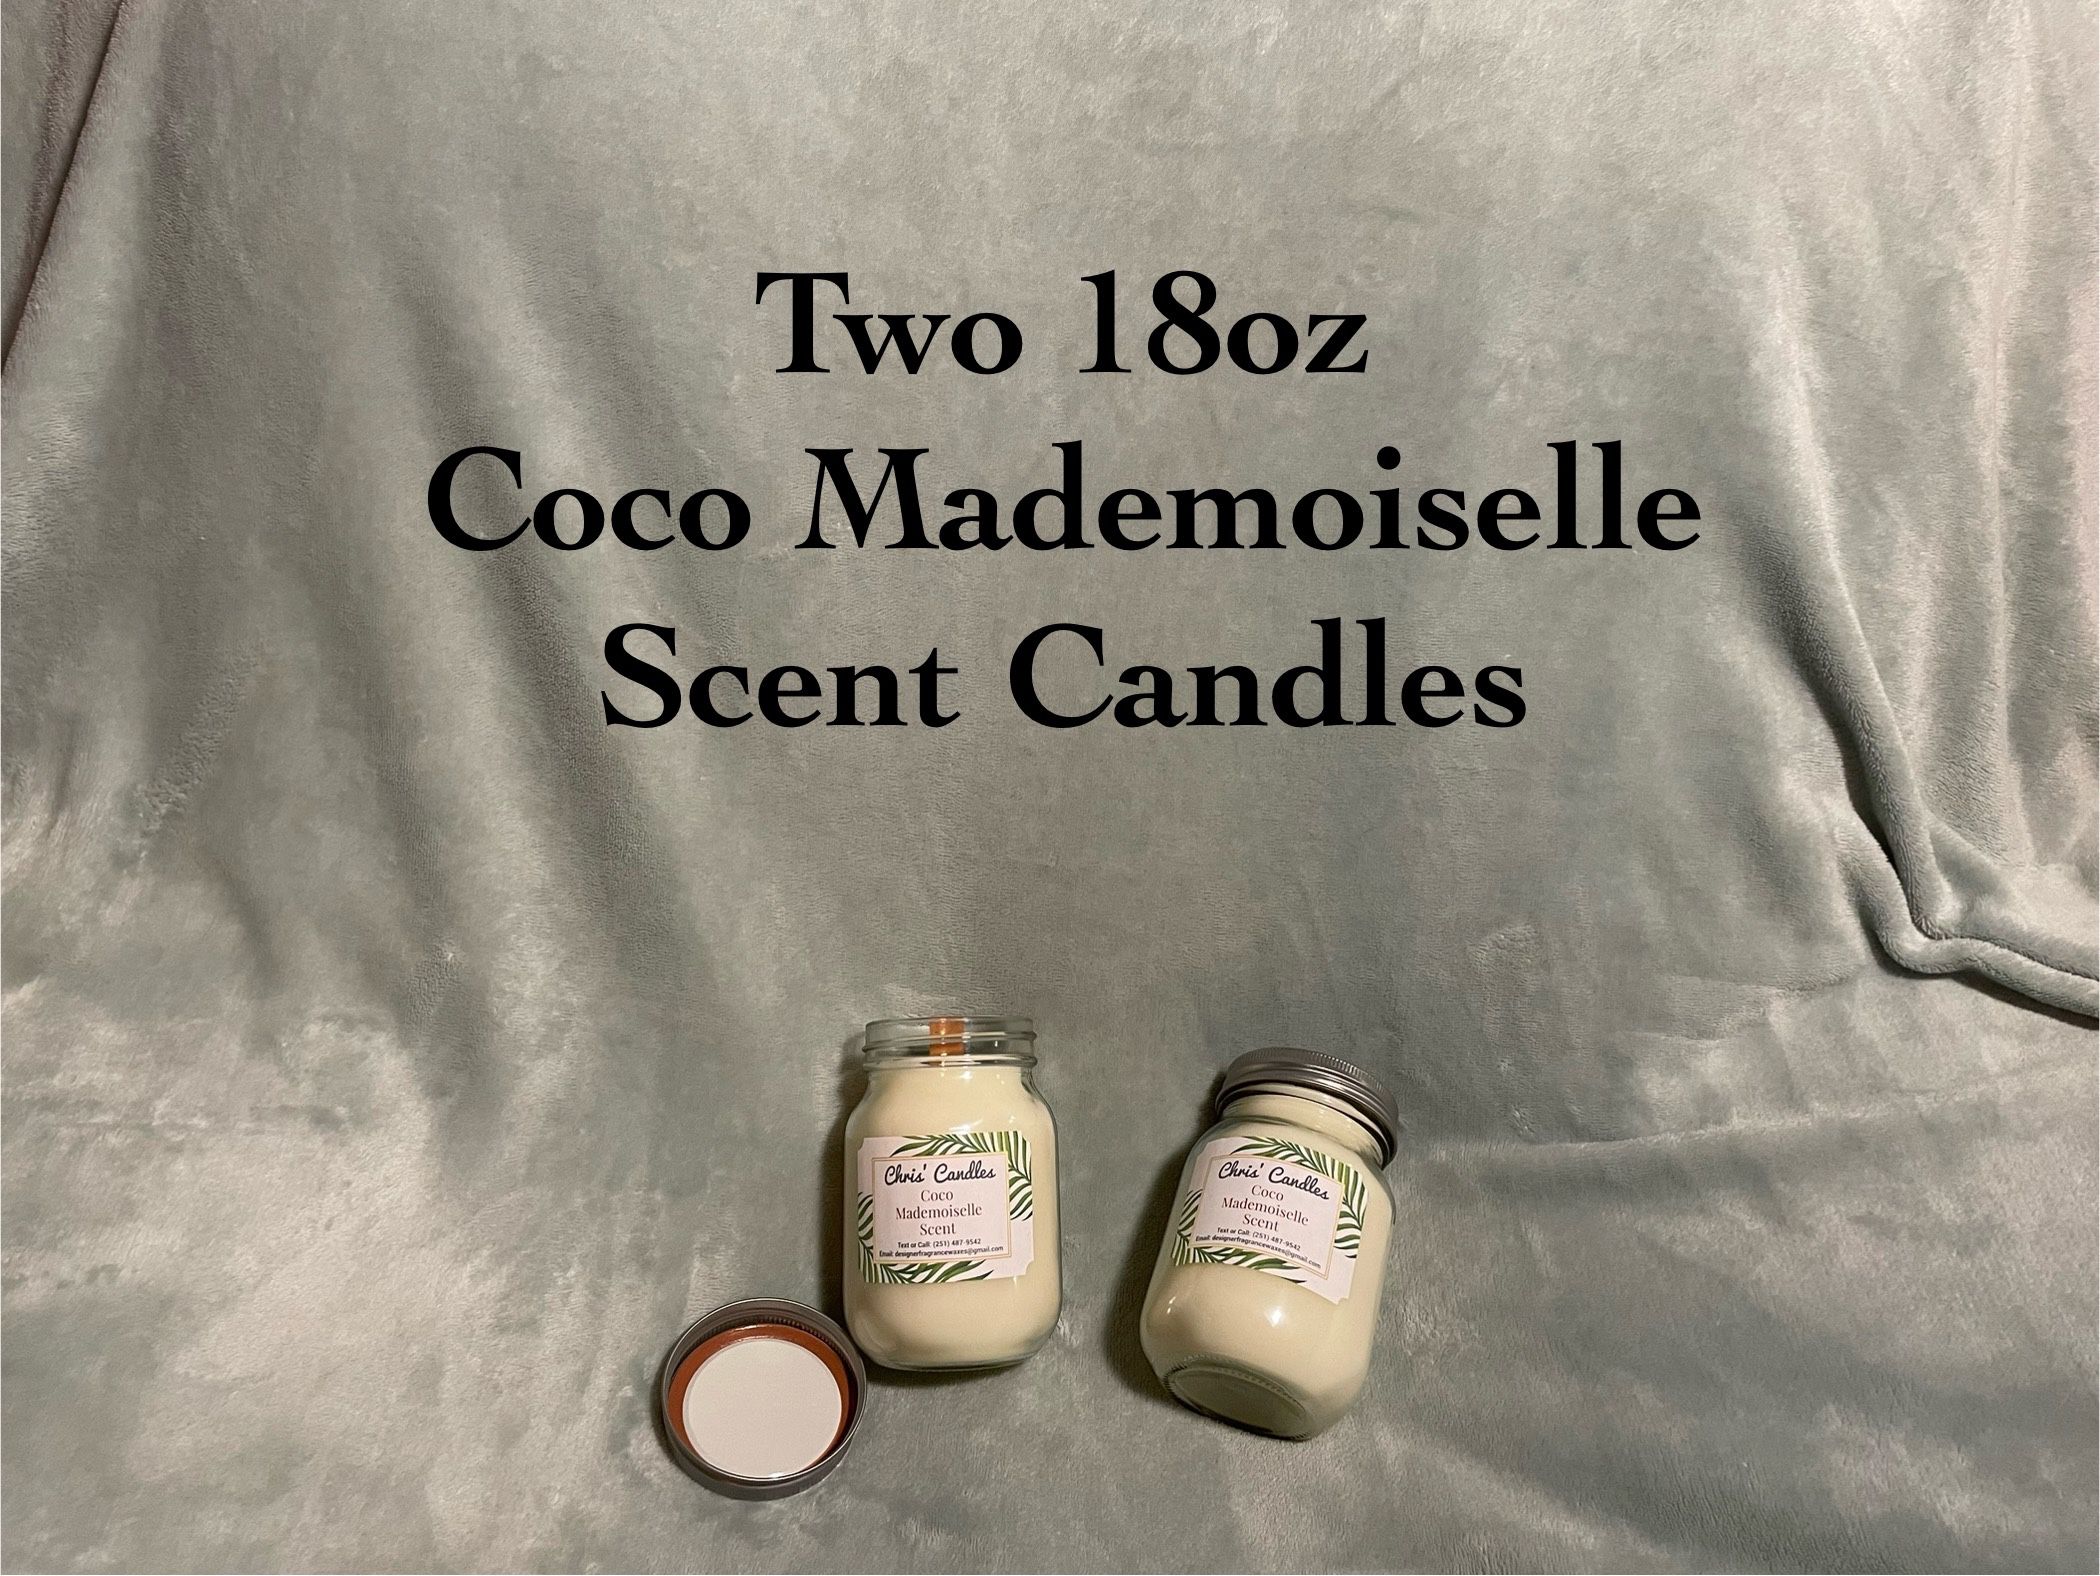 Two 18oz Coco Mademoiselle Scent Candles